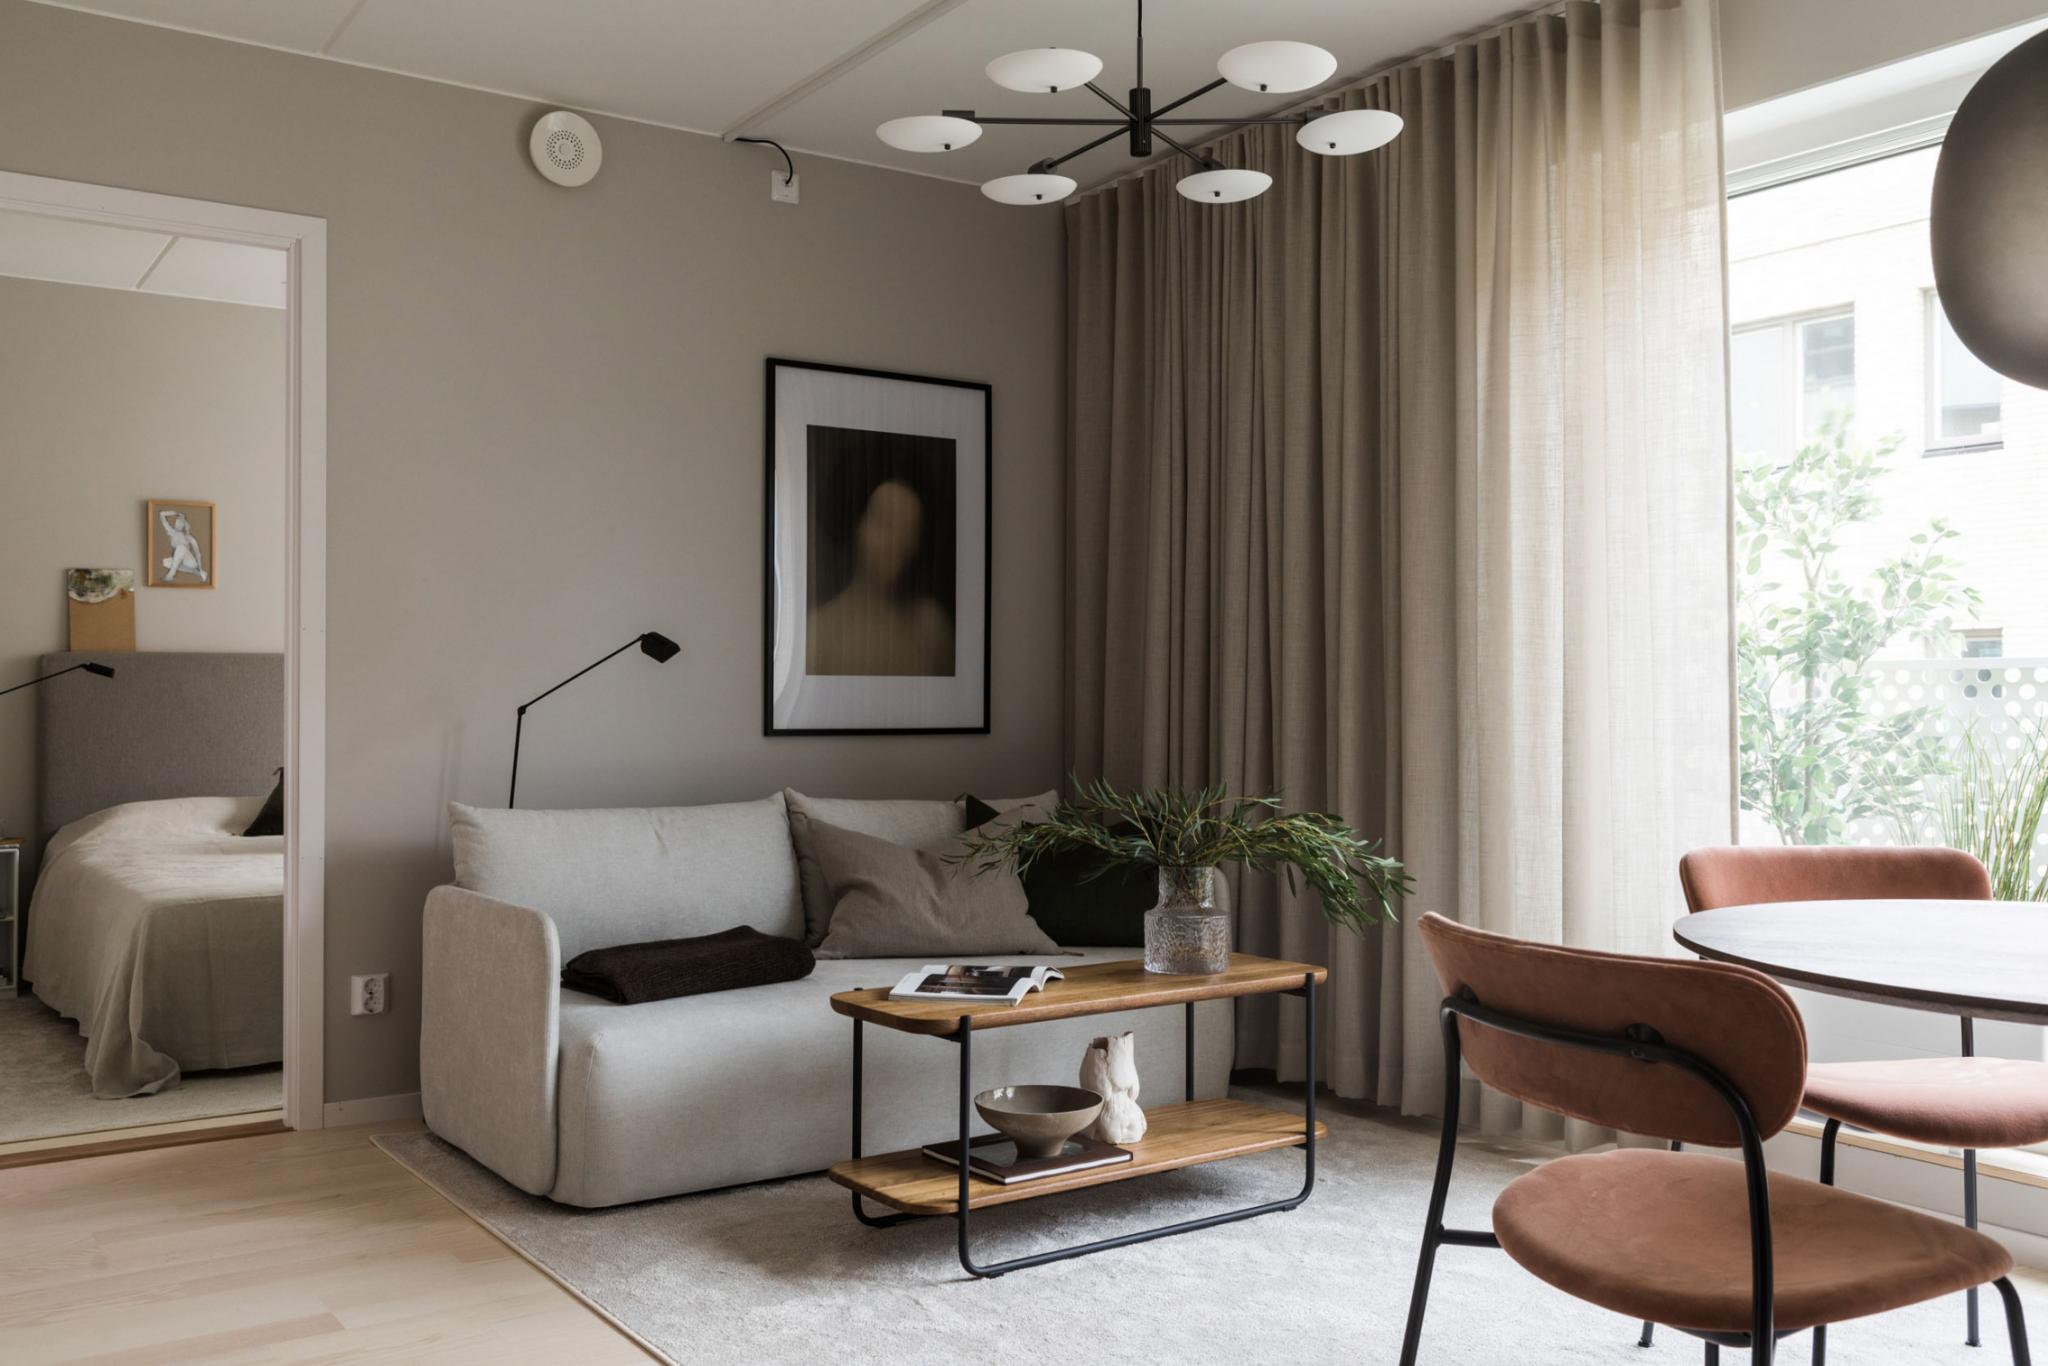 Stockholm apartment in neutral colours and beautiful natural light.